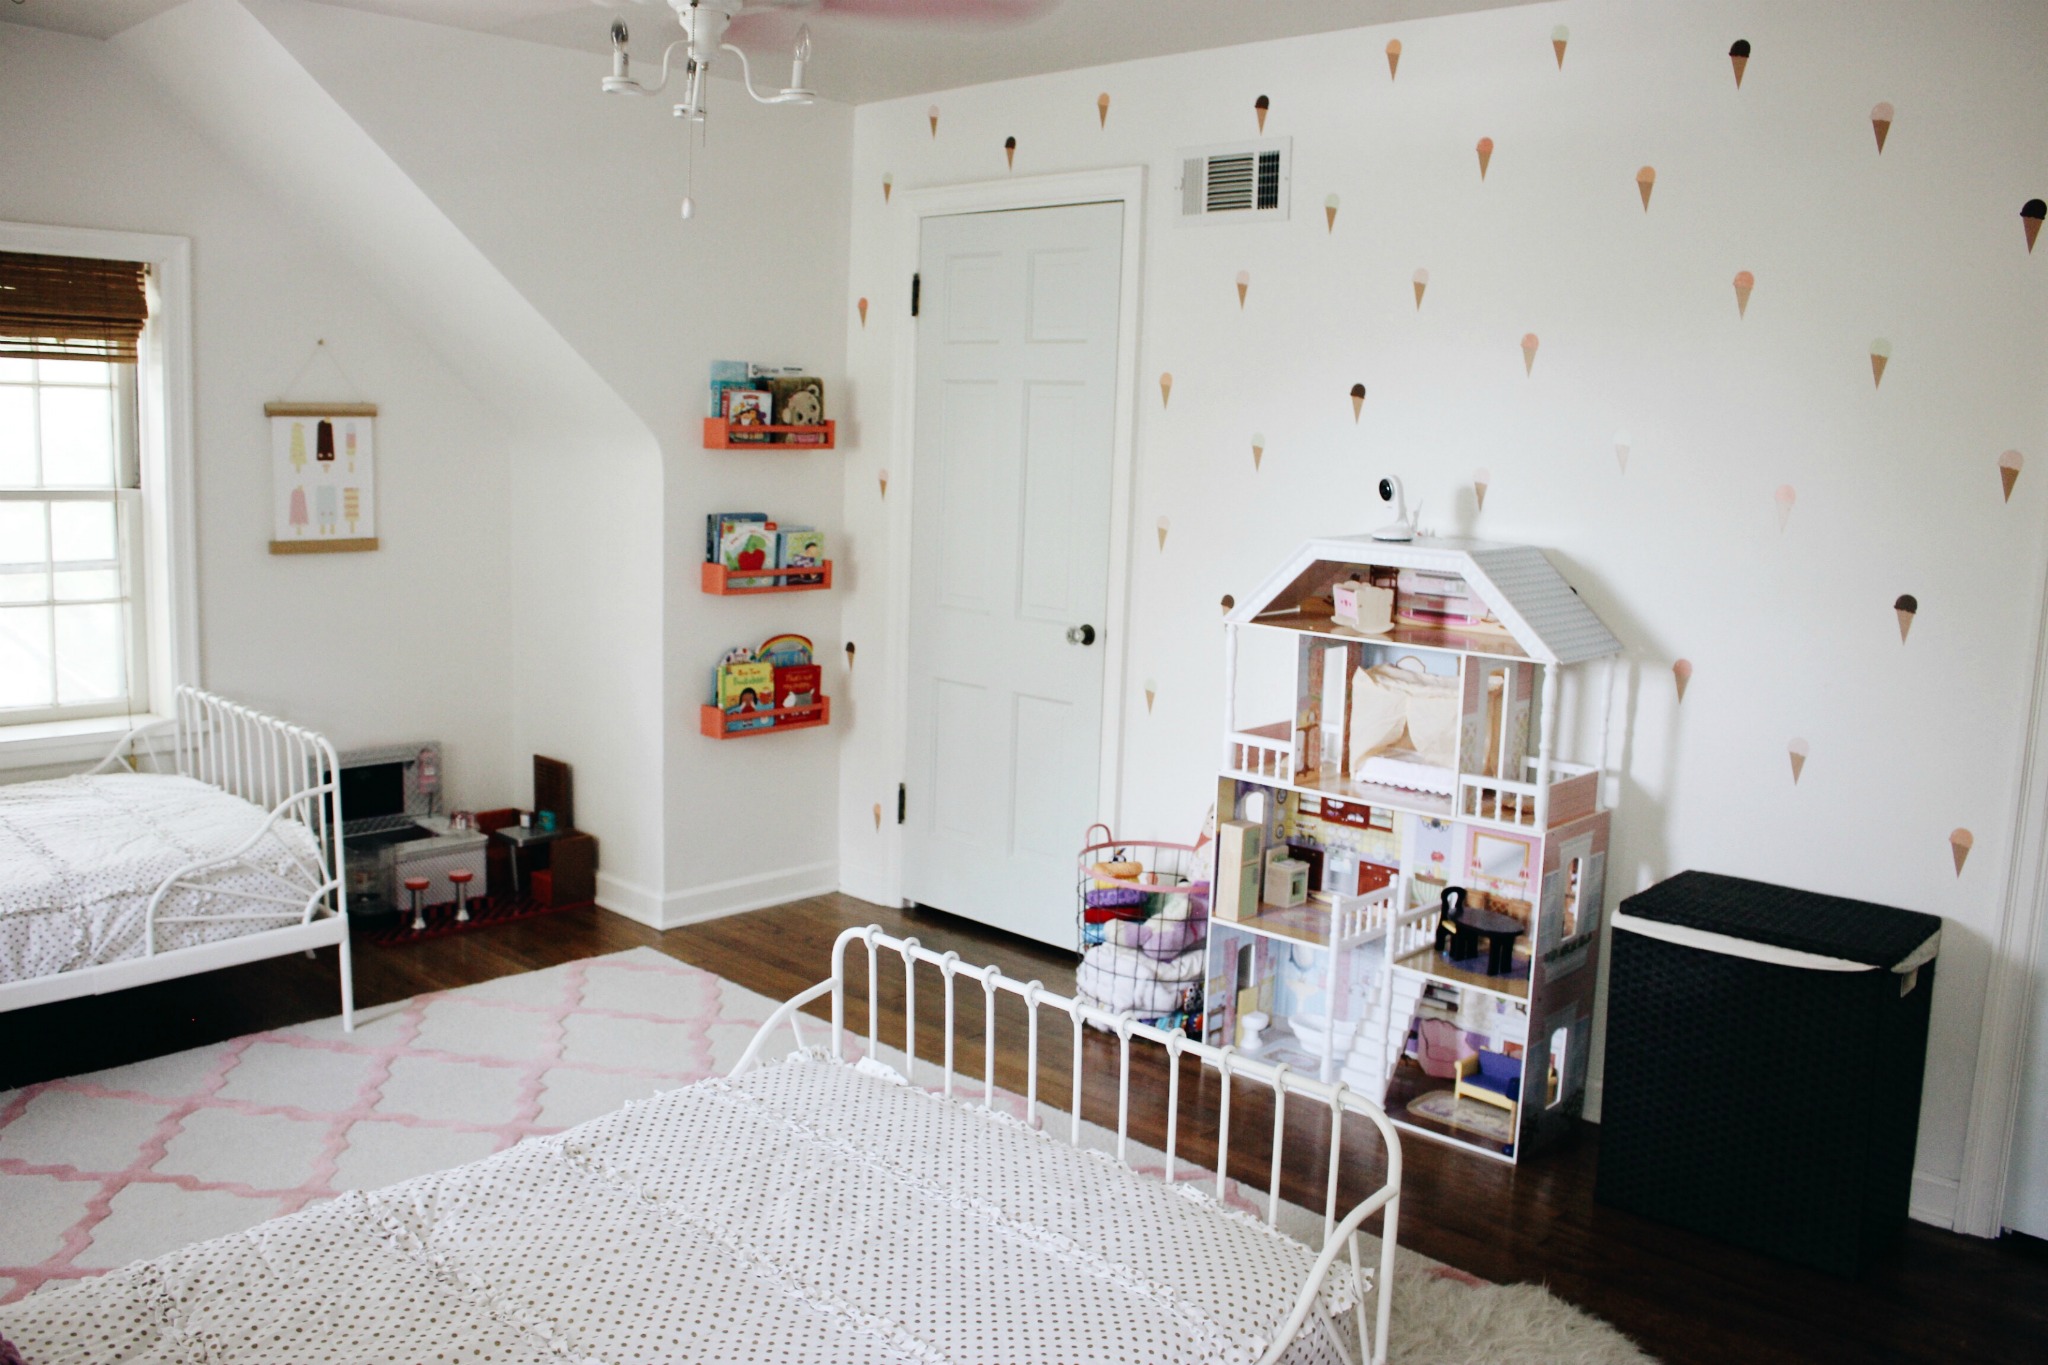 Whimsical Shared Girls Room - Project Nursery